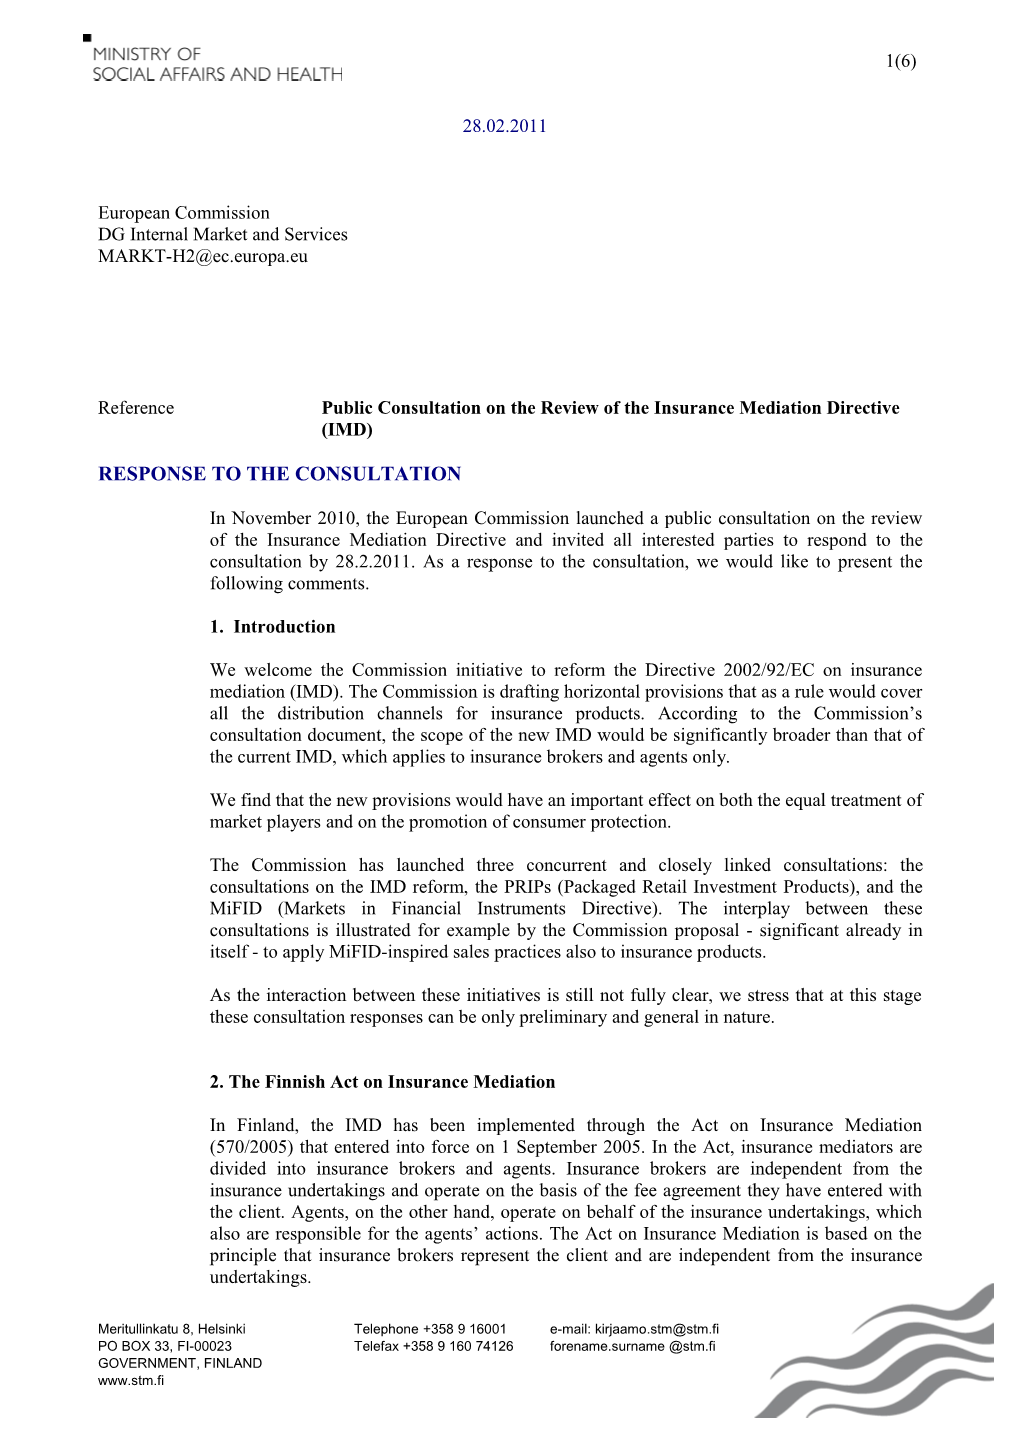 Reference Public Consultation on the Review of the Insurance Mediation Directive (IMD)